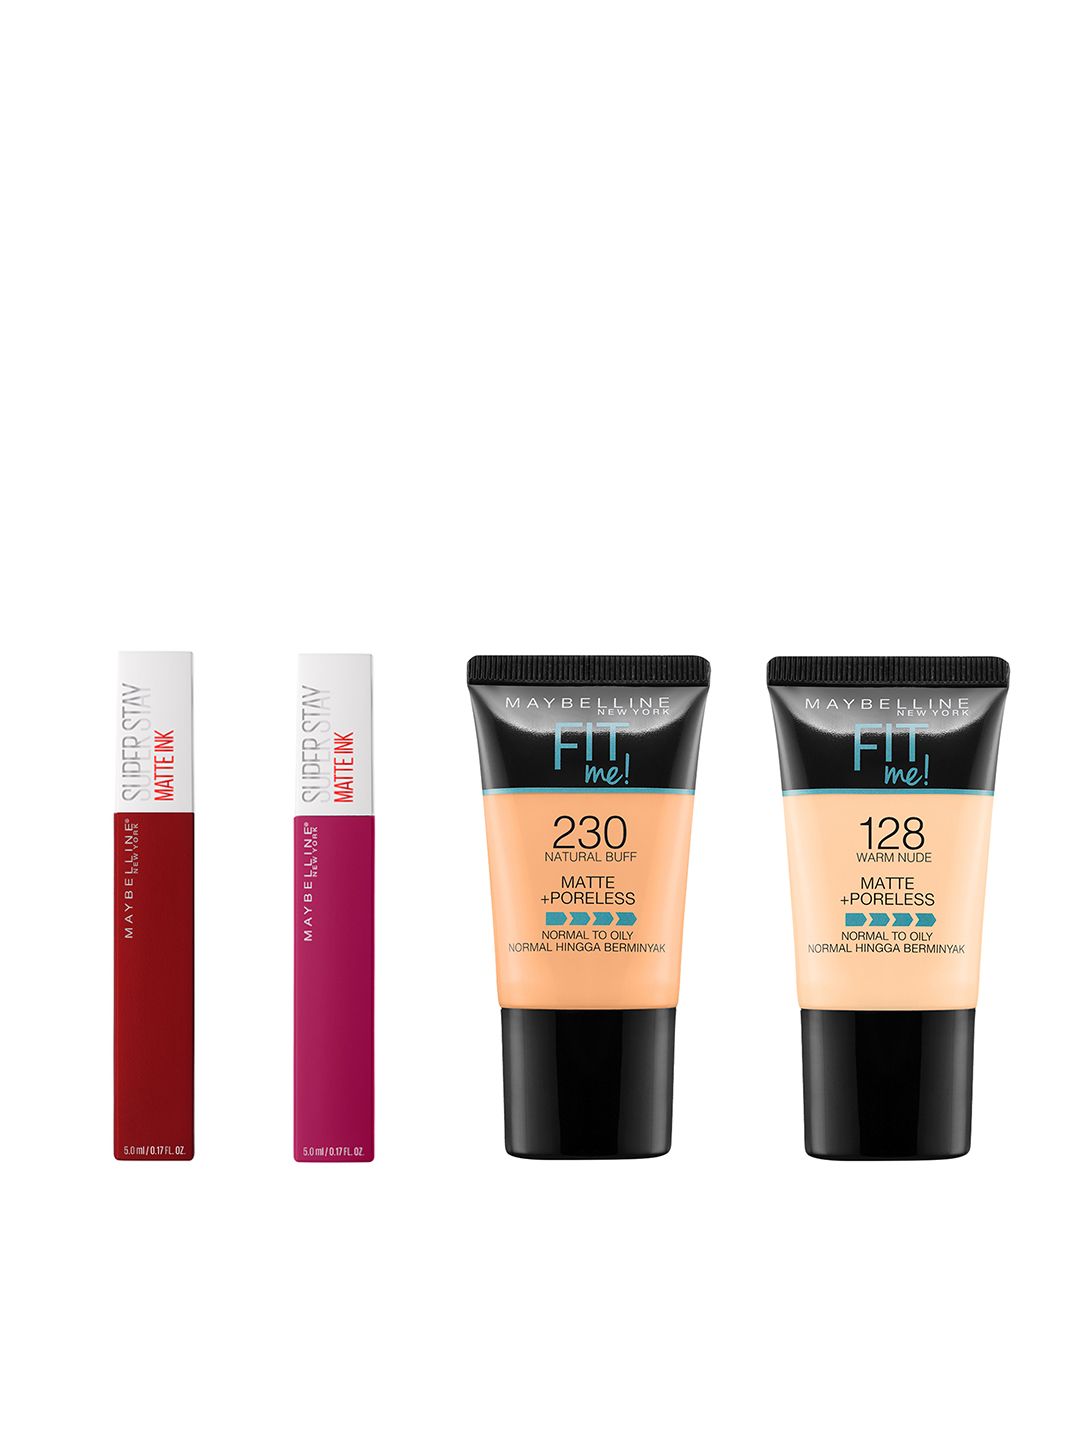 Maybelline New York Set Of 2 Foundations & 2 Super Stay Matte Ink Liquid Lipsticks Price in India